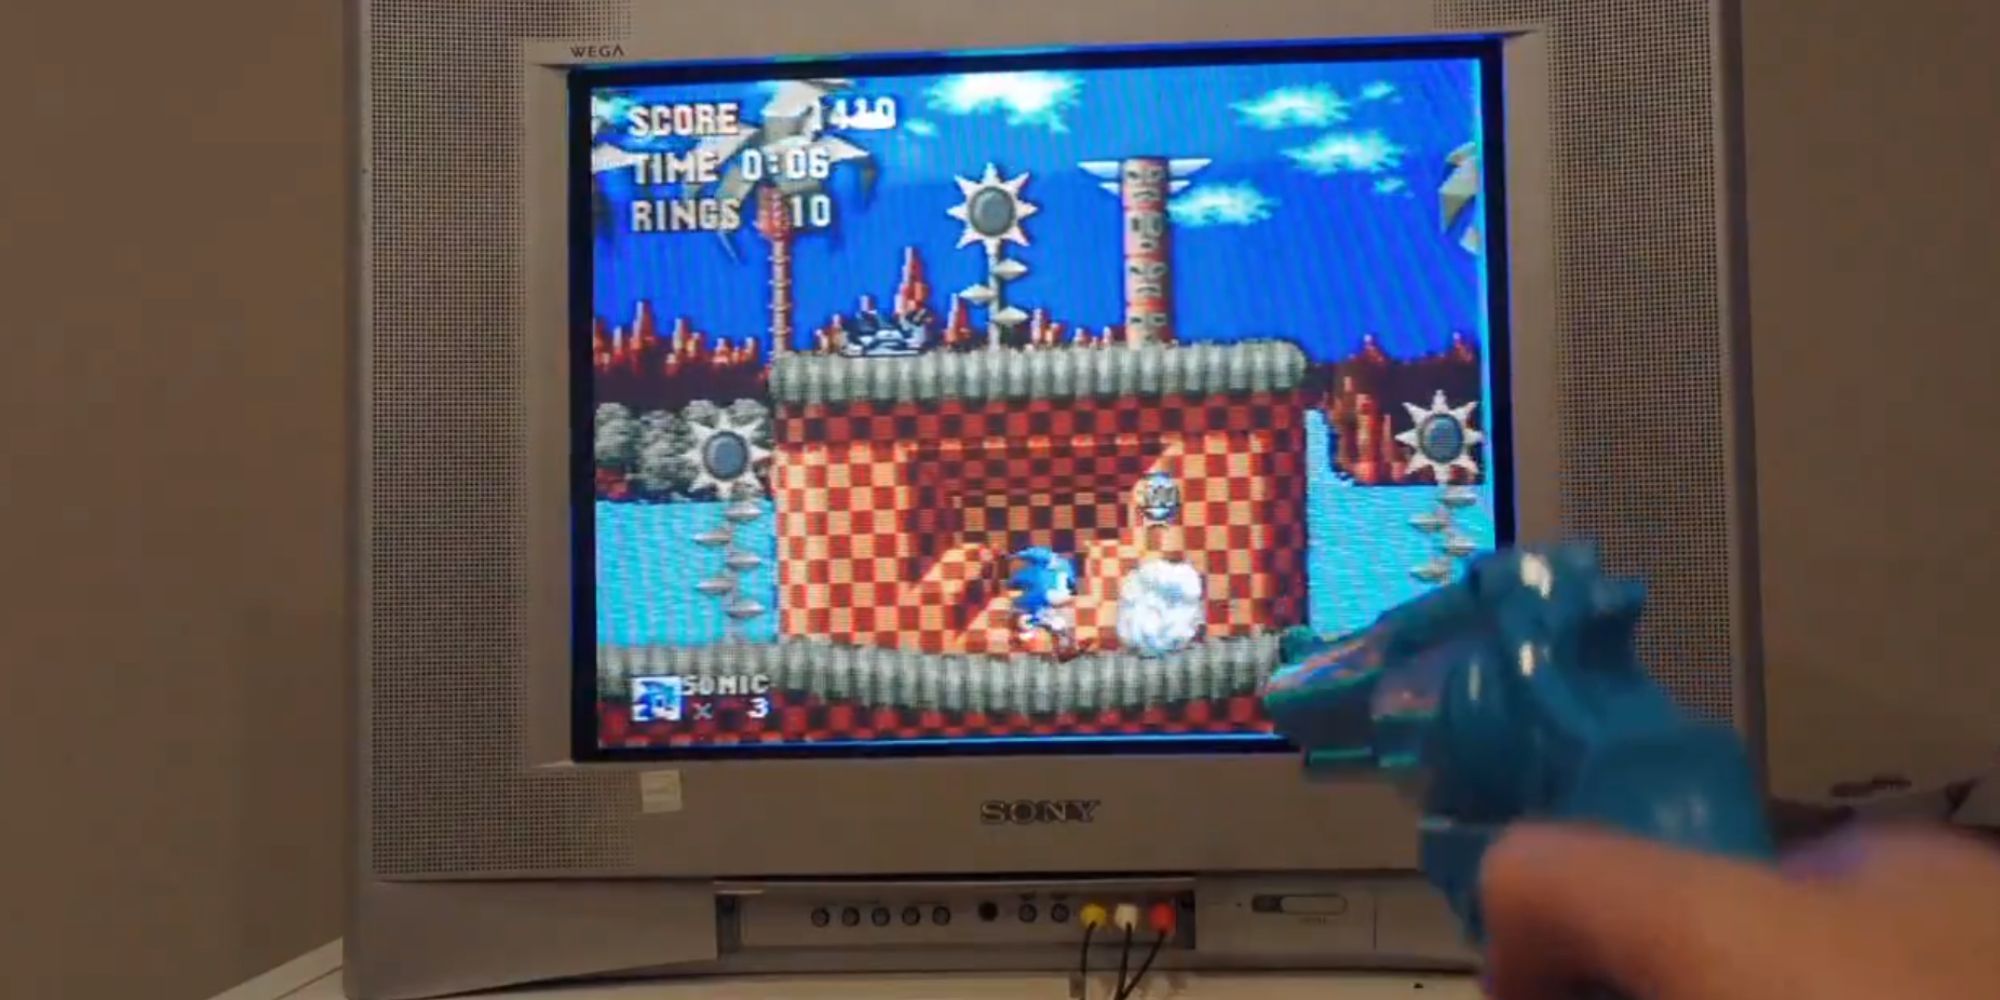 Sonic the Hedgehog on Mega Drive being played with a light gun controller